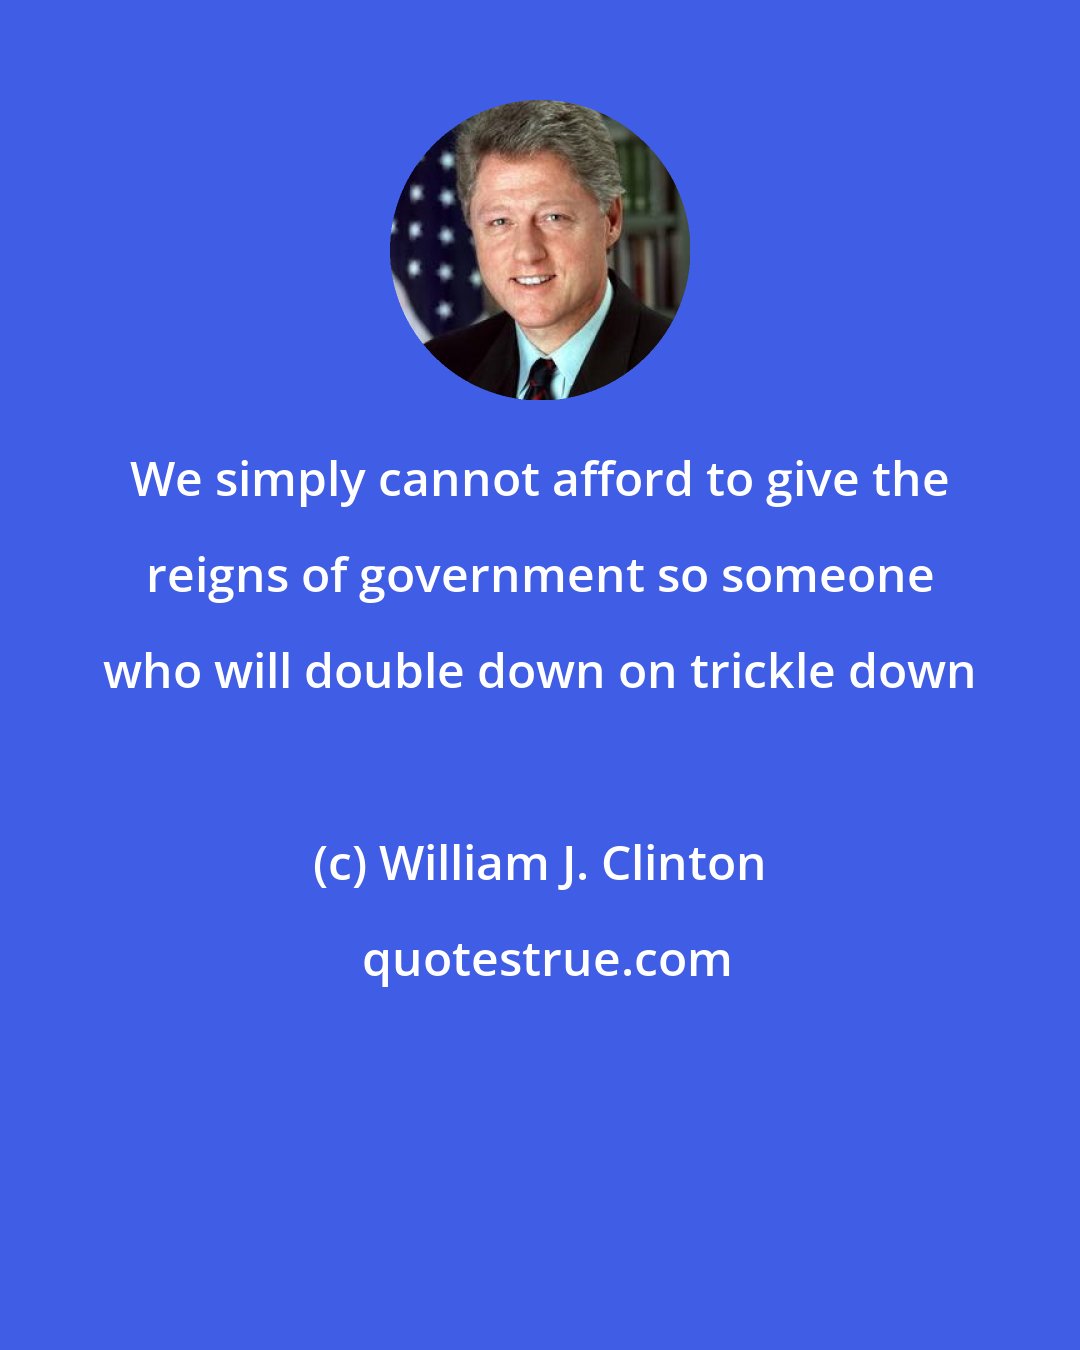 William J. Clinton: We simply cannot afford to give the reigns of government so someone who will double down on trickle down